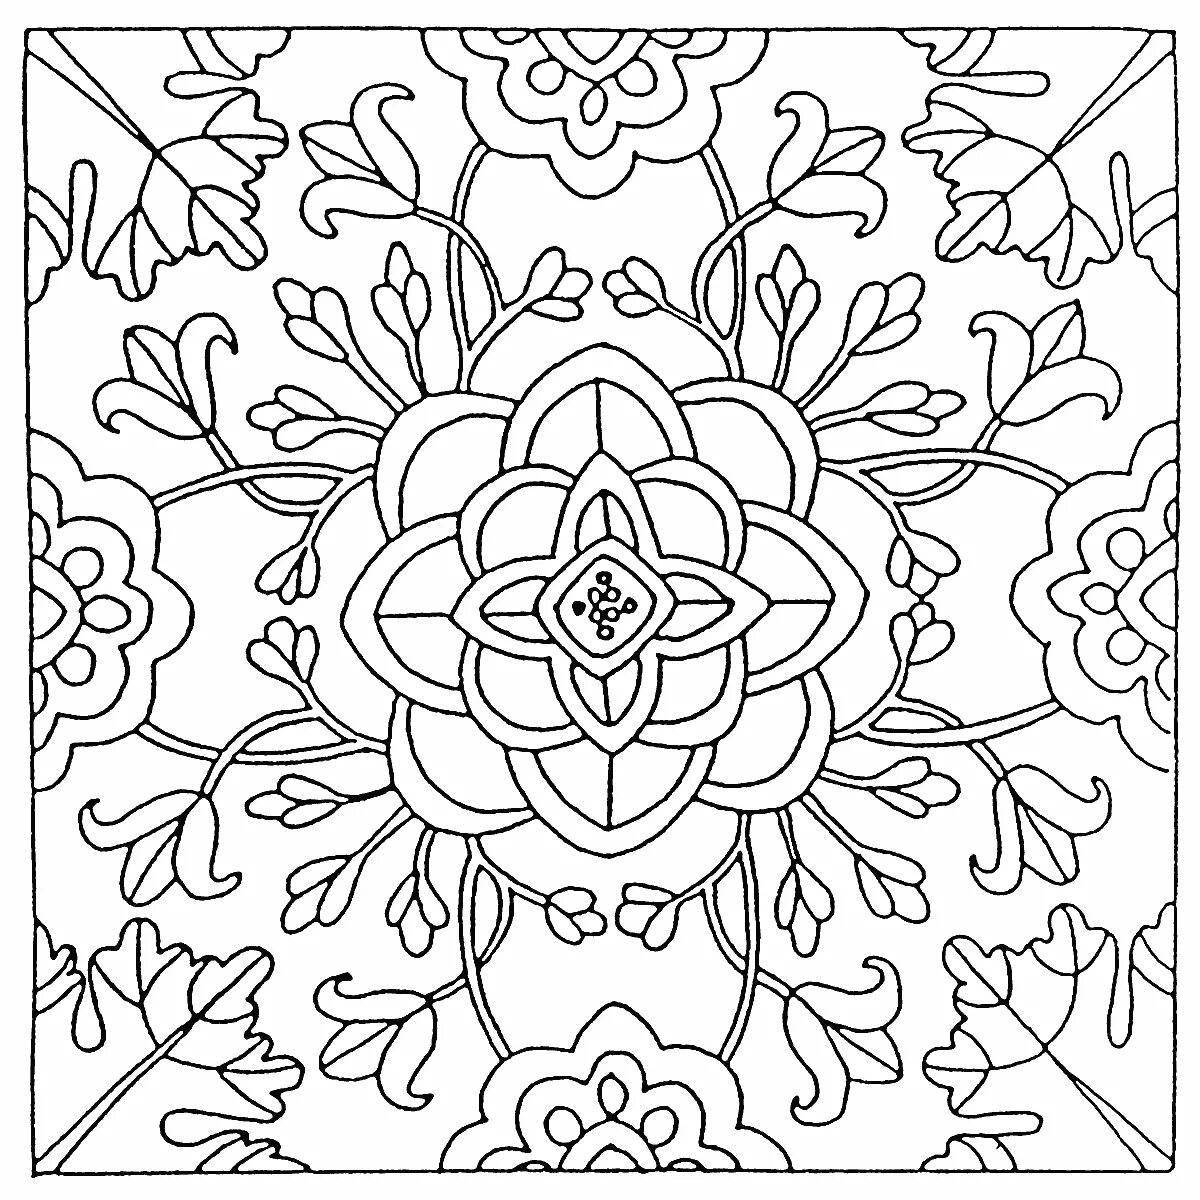 Fun scarf coloring page for kids